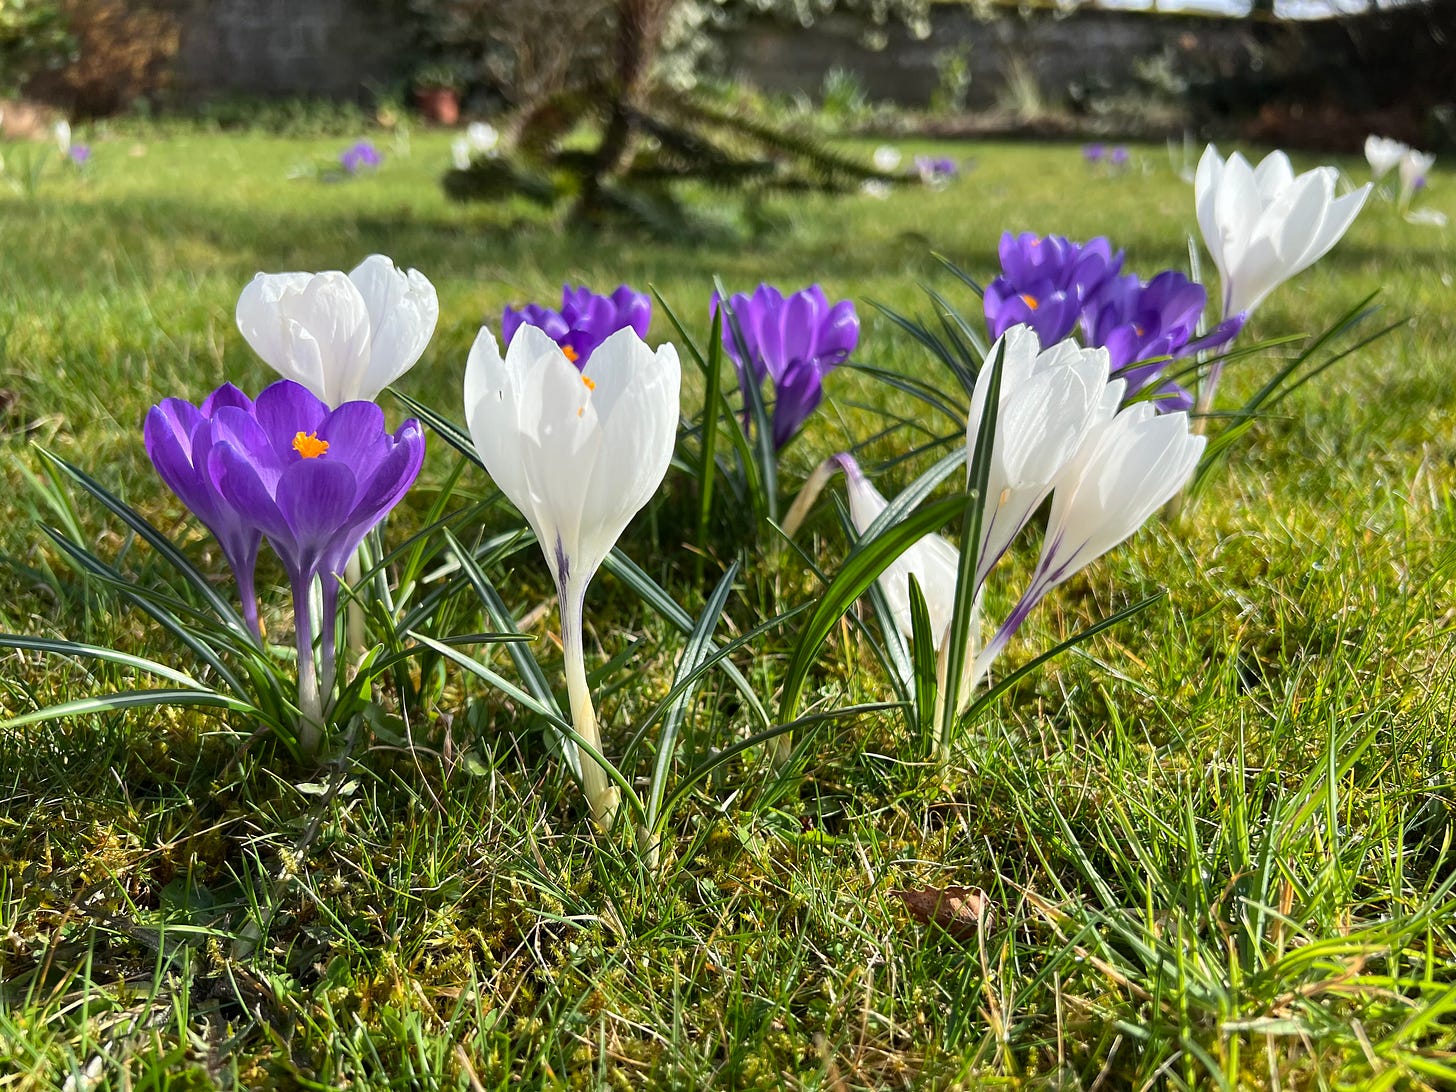 Purple and white crocuses growing in grass on a sunny day